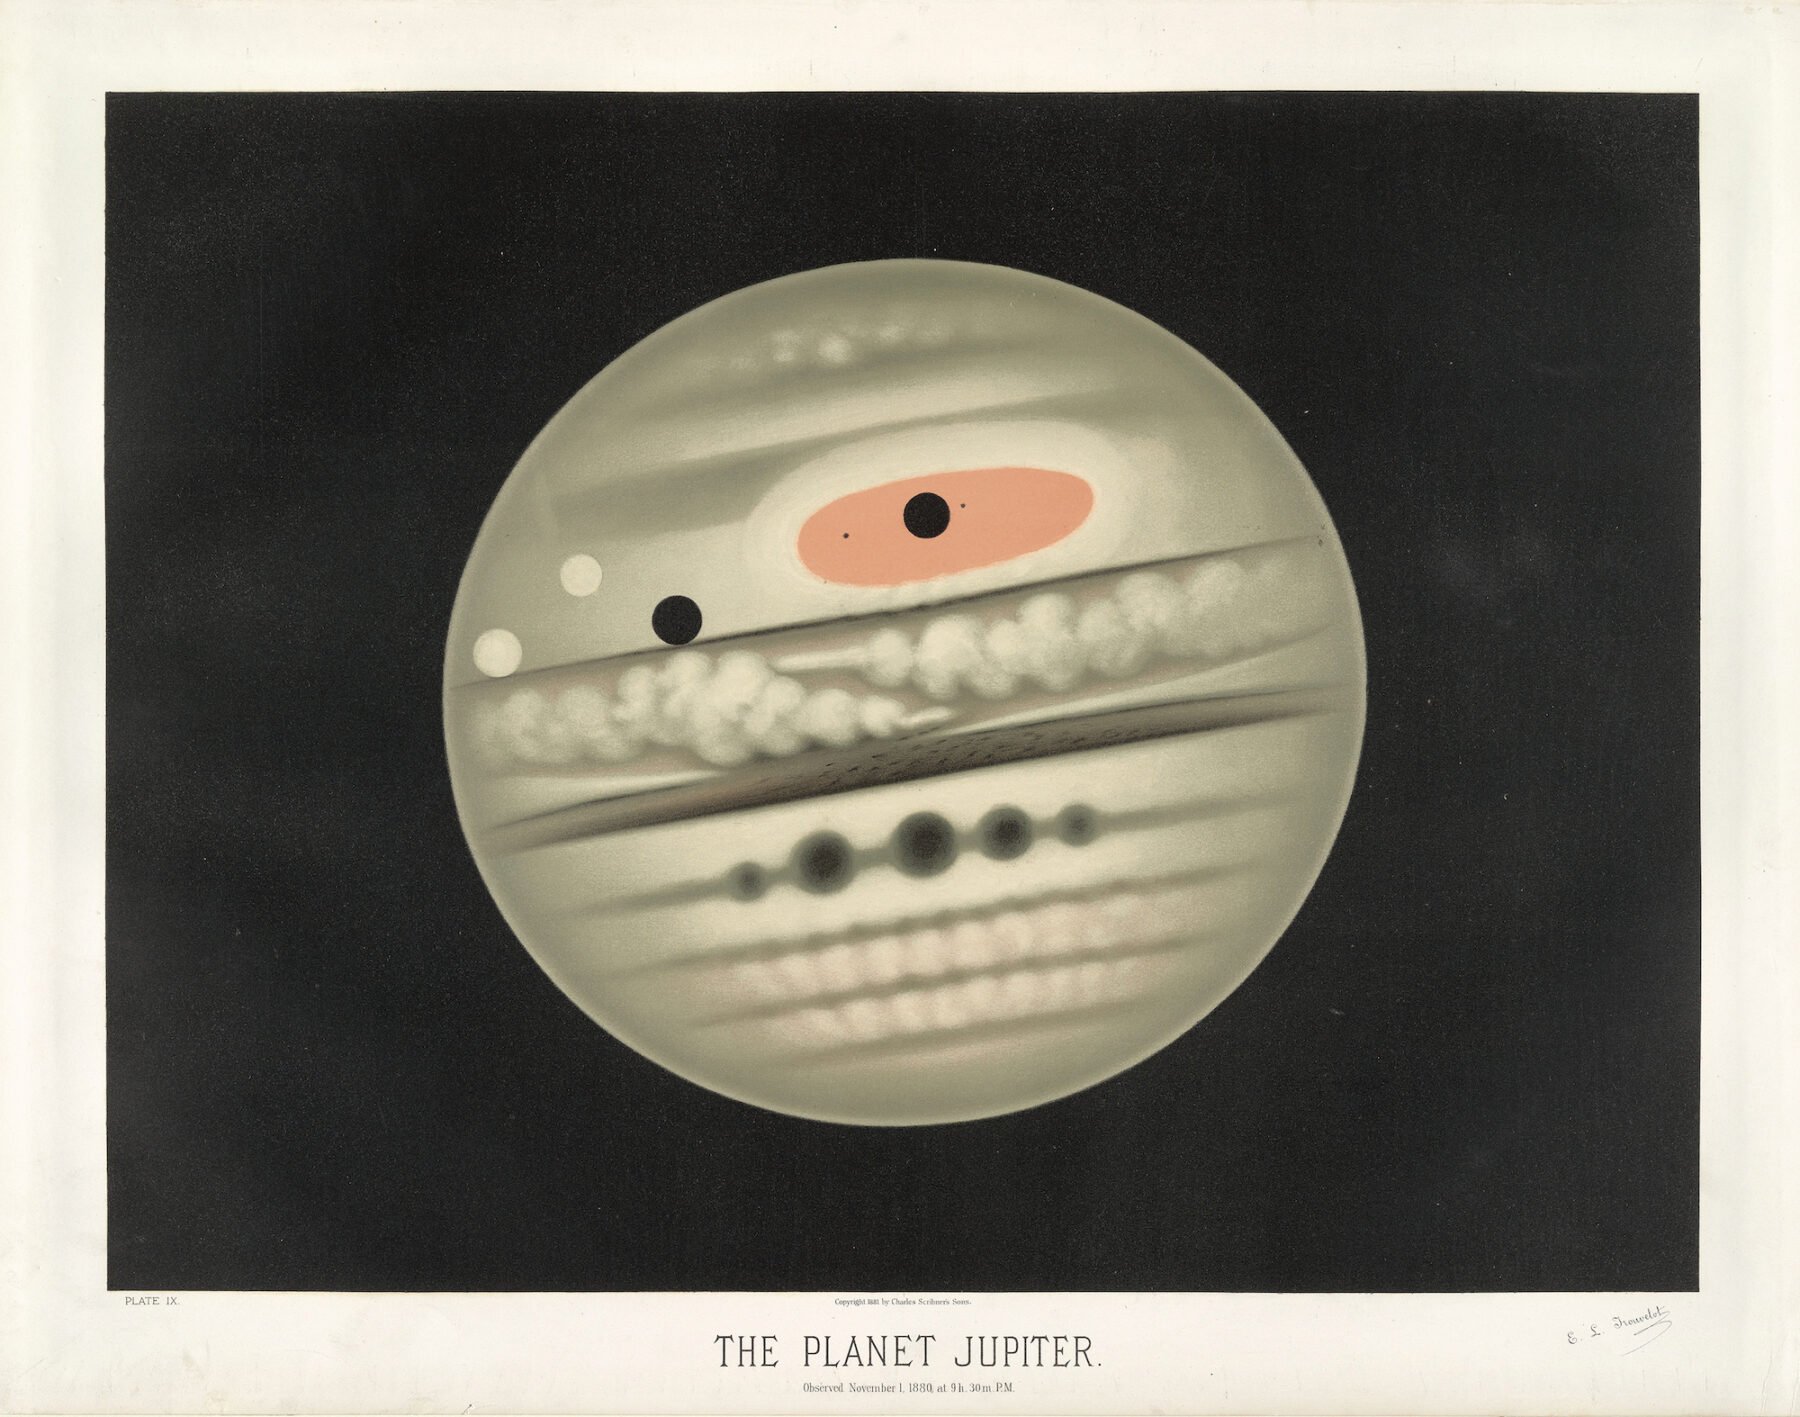 Étienne Léopold Trouvelot, The Planet Jupiter, 1881–1882, Chromolithograph, 33 x 41 inches, Smithsonian National Air and Space Museum. Image credit: New York Public Library, Rare Book Division, Digital Collections: All Astronomical Drawings.